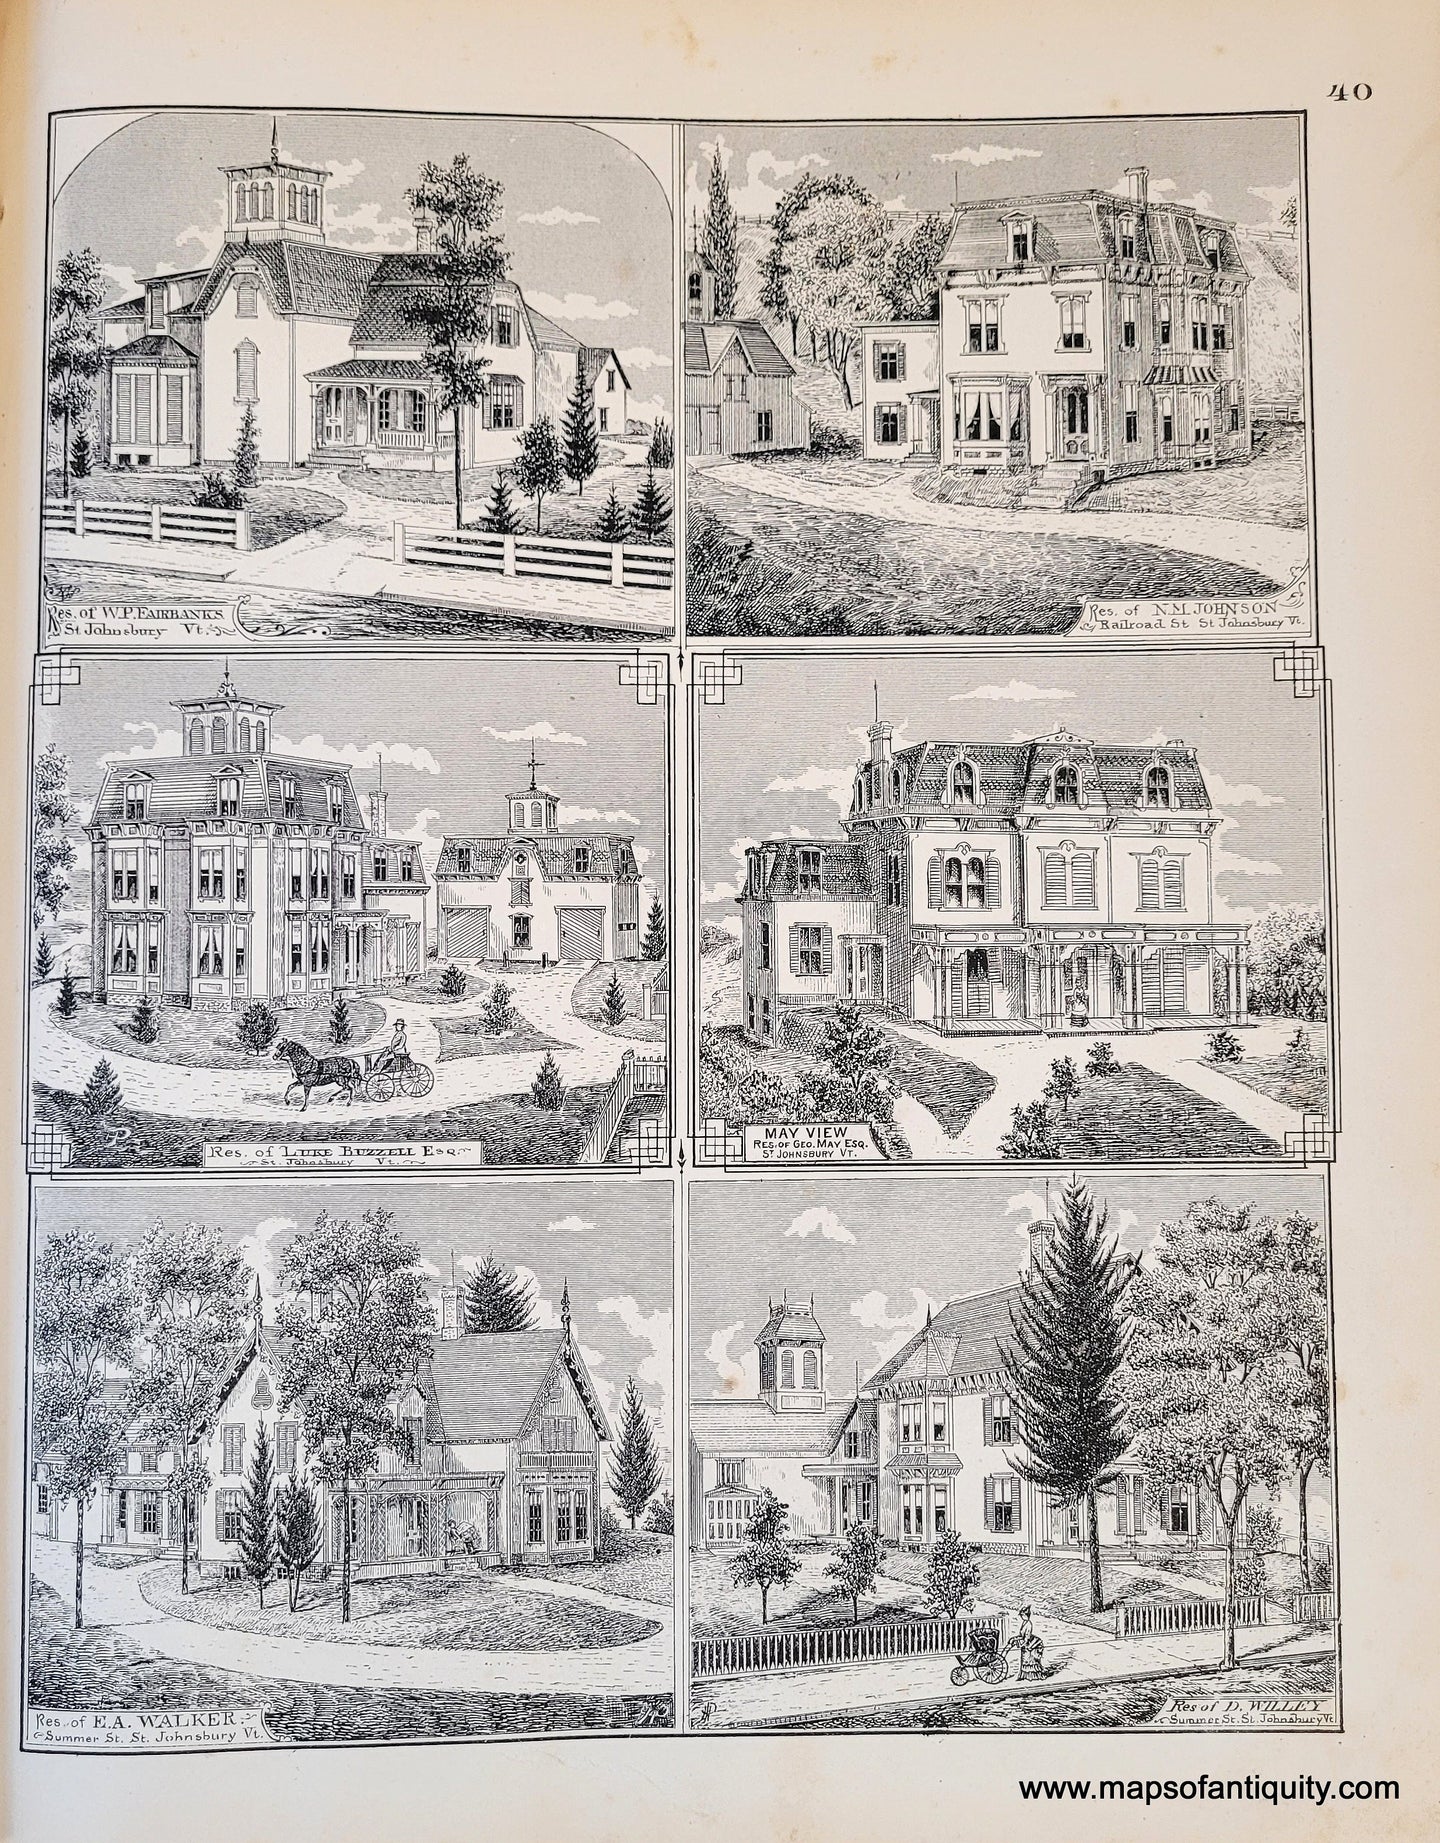 Genuine-Antique-Print-Page-of-Illustrations-Residences-in-St-Johnsbury-VT-1875-Beers-Maps-Of-Antiquity